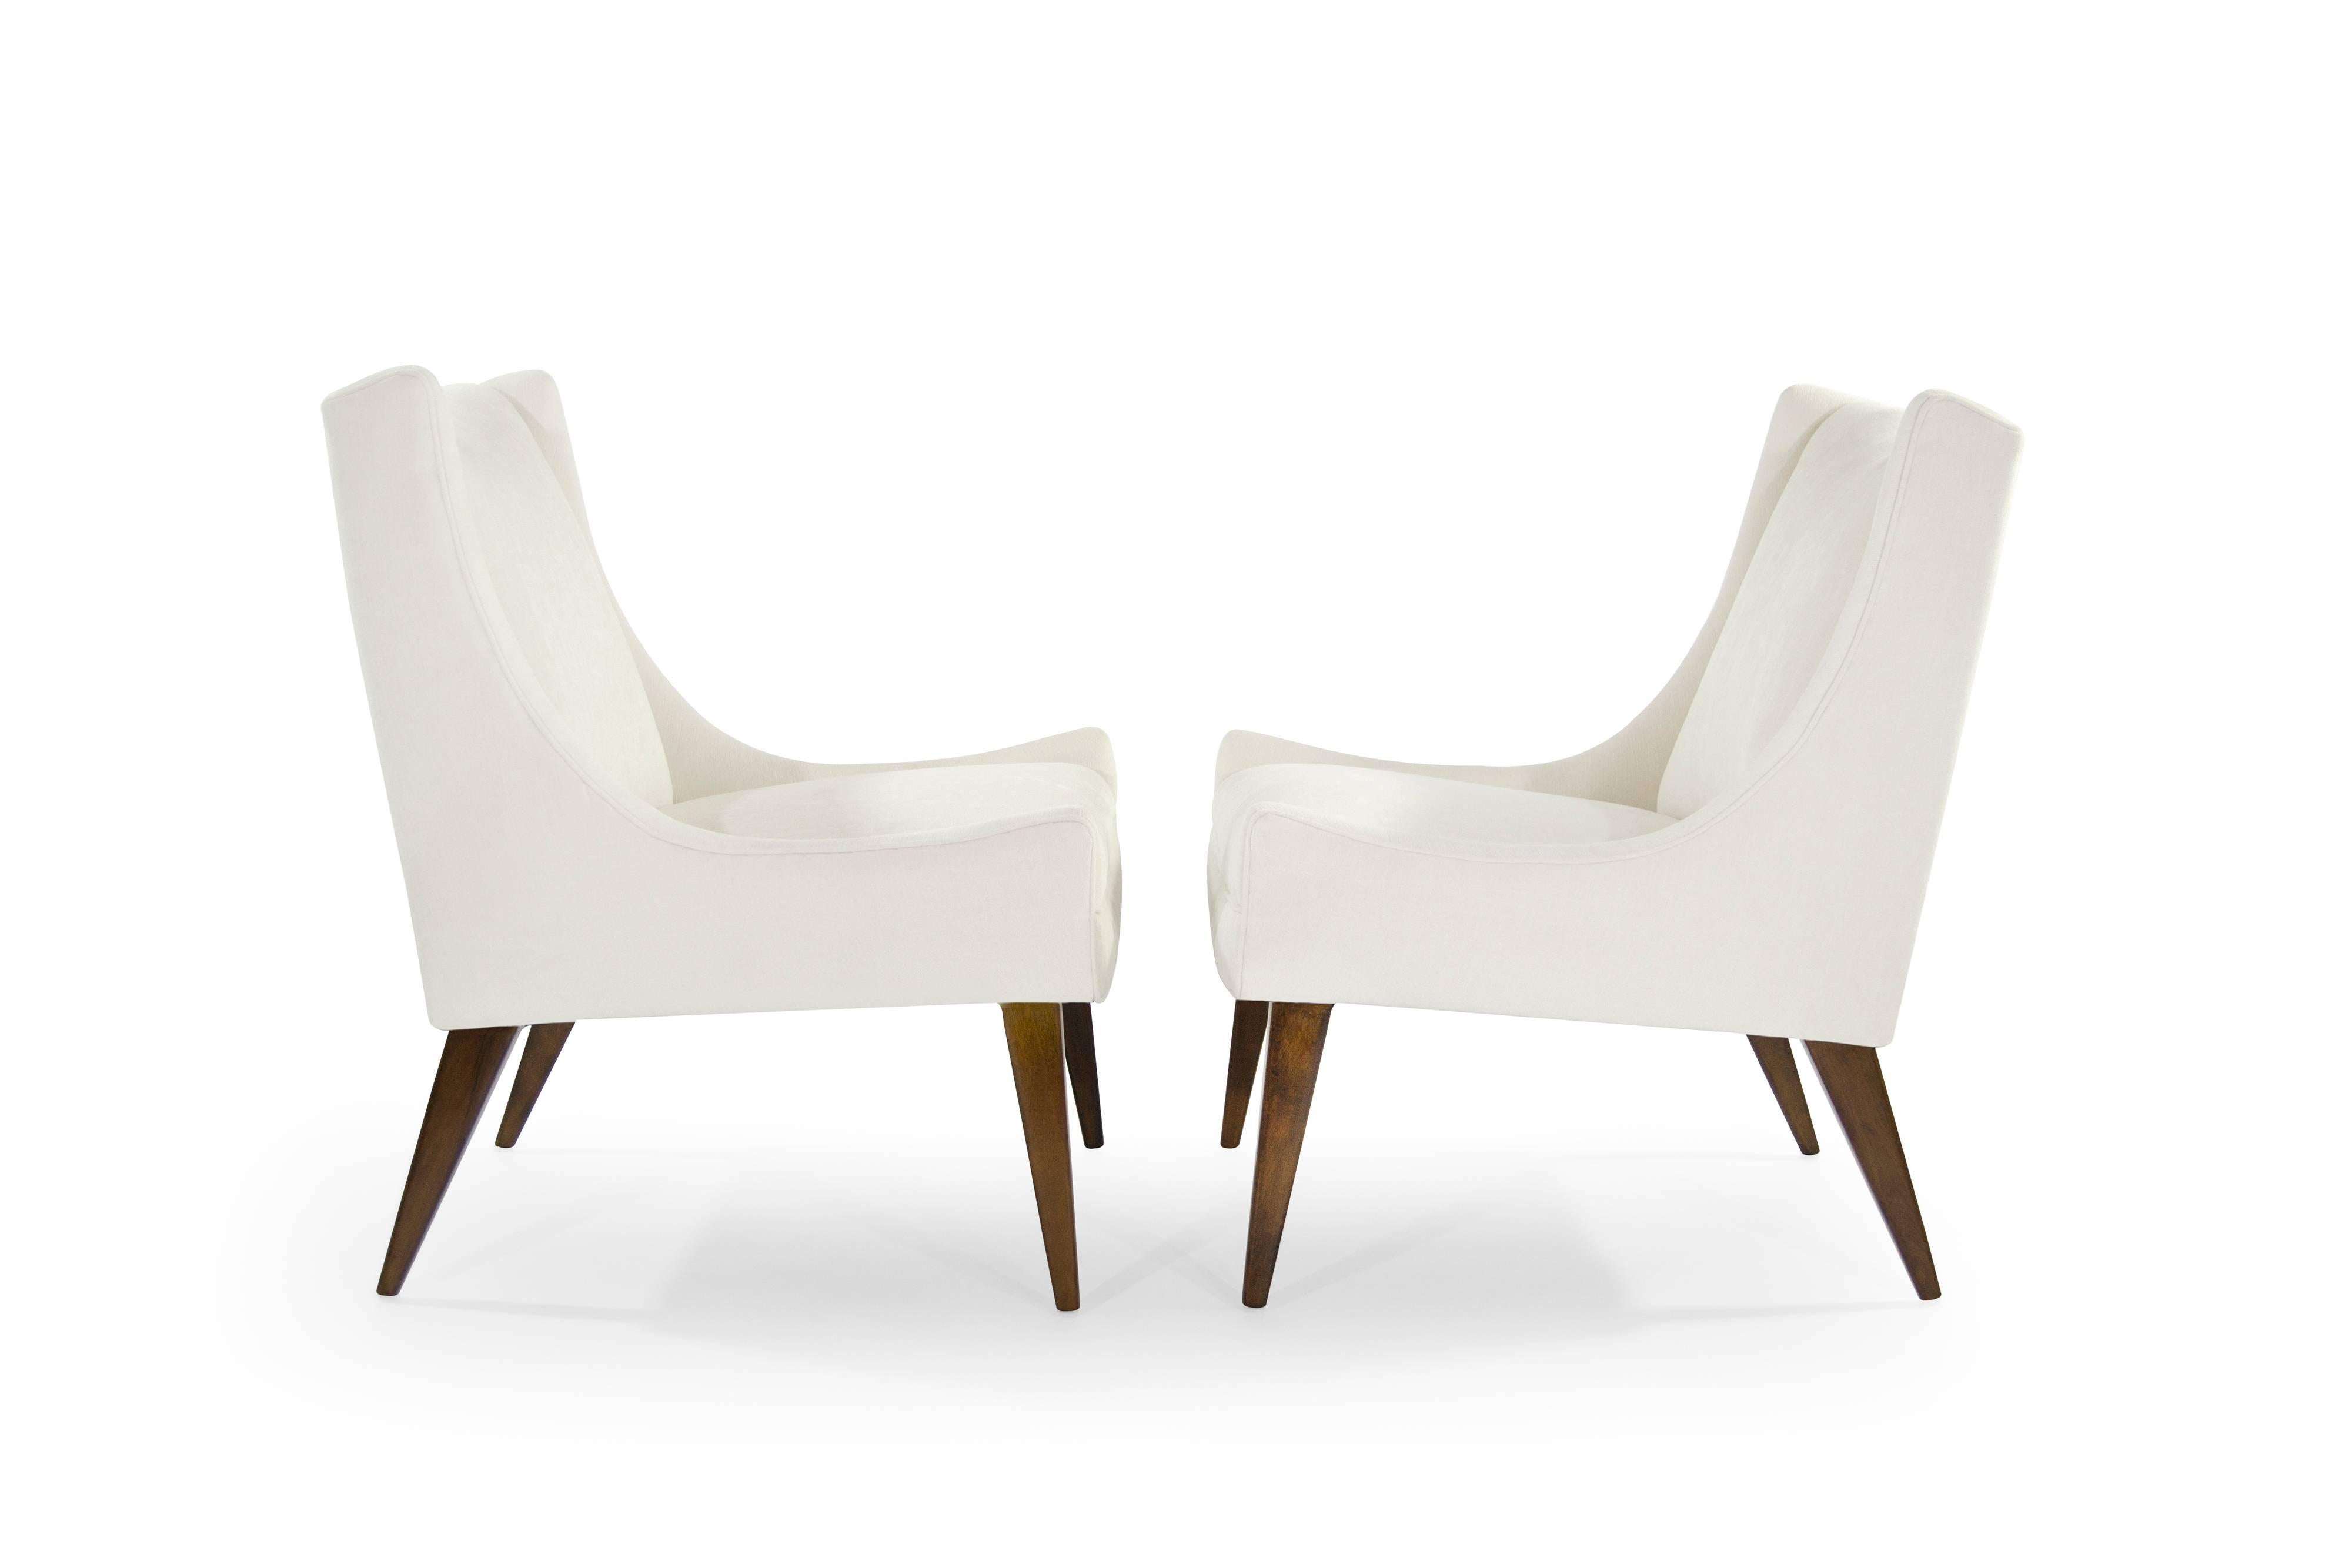 Set of slipper chairs by Selig, circa 1950s. Newly upholstered in a soft ivory velvet. Walnut legs fully restored. Brass handle detail hand polished.